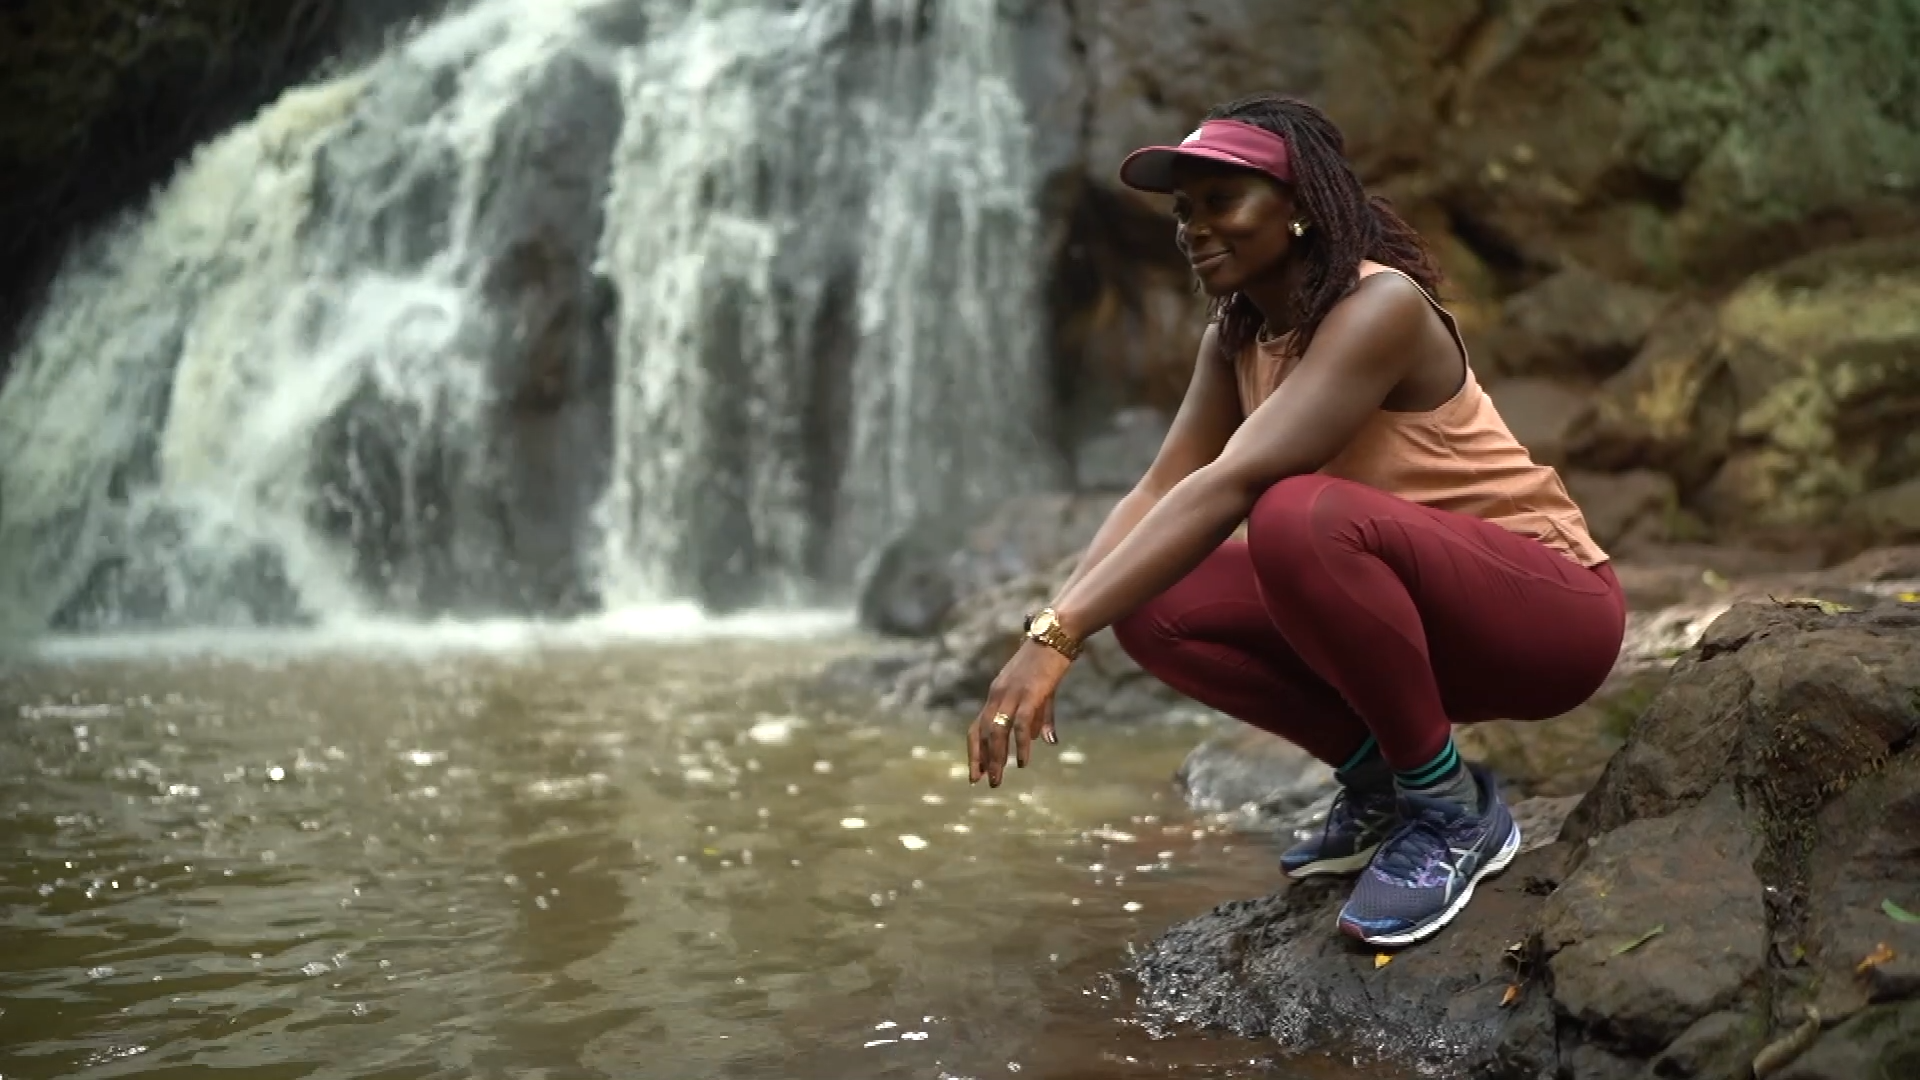 Dr. Liz Wangia sits next to a waterfall dressed in orange and red sportswear